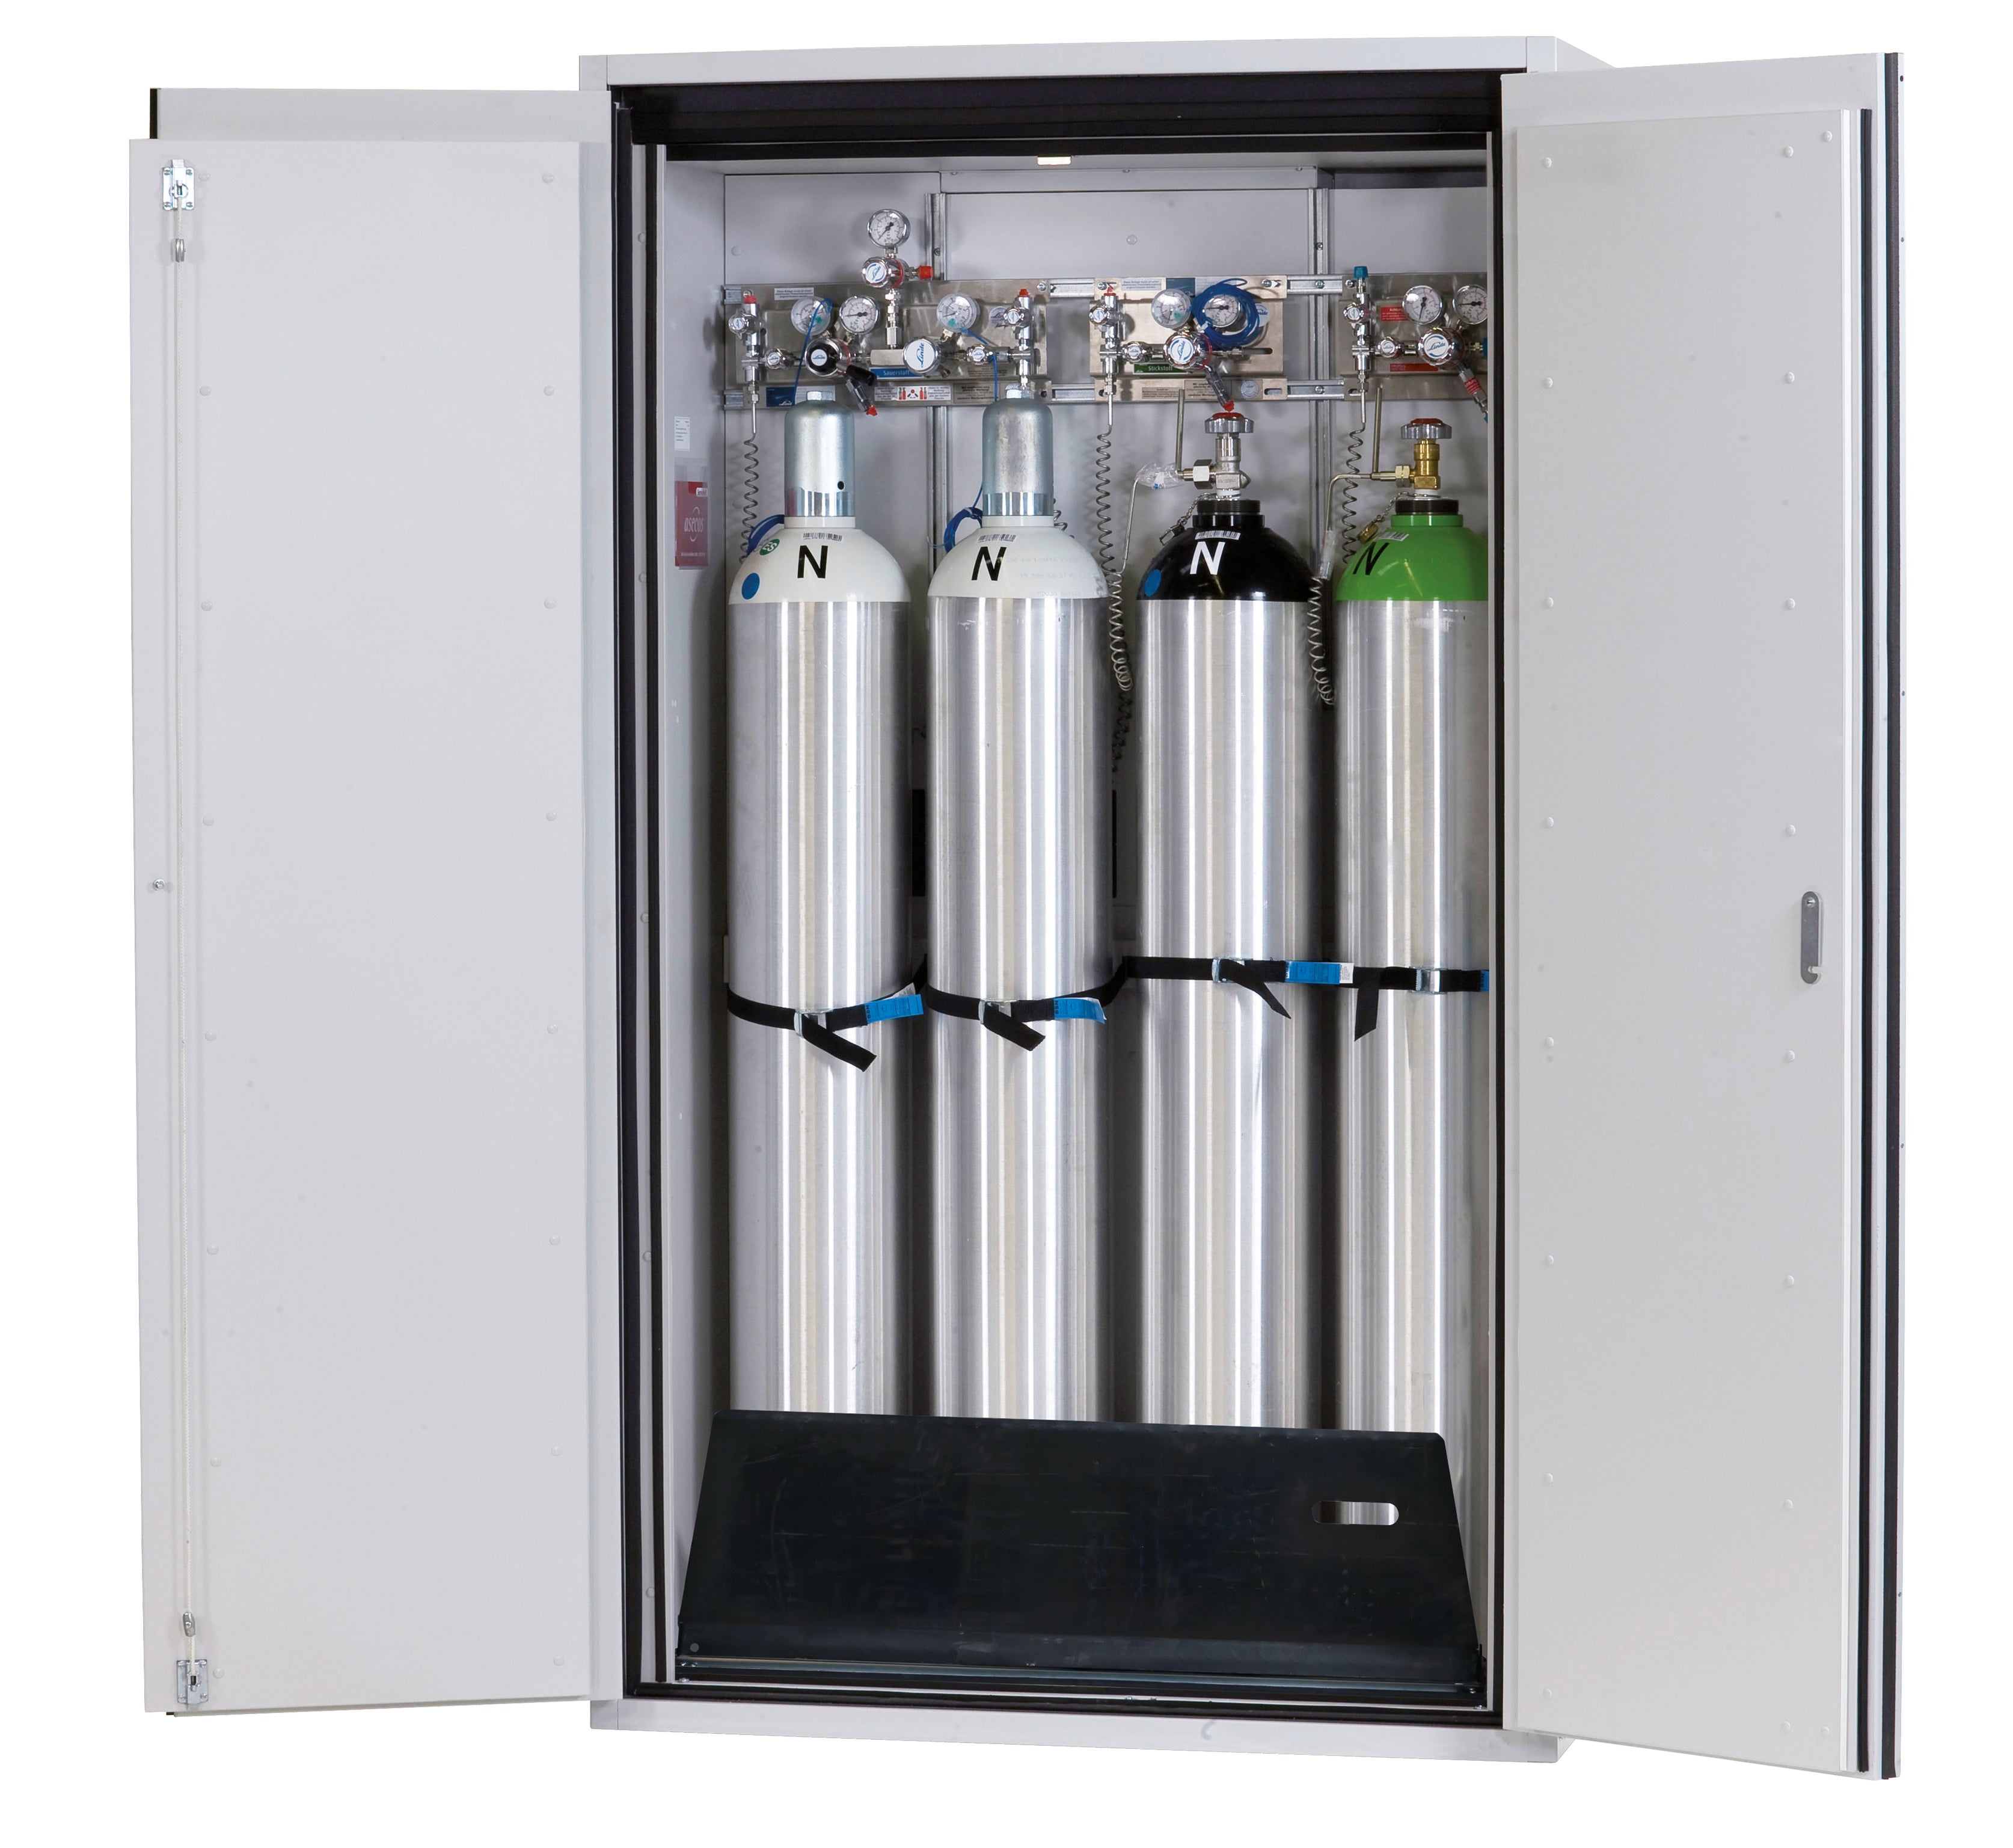 Type 90 compressed gas bottle cabinet G-ULTIMATE-90 model G90.205.120 in light gray RAL 7035 with standard interior fittings for 4x compressed gas bottles of 50 liters each